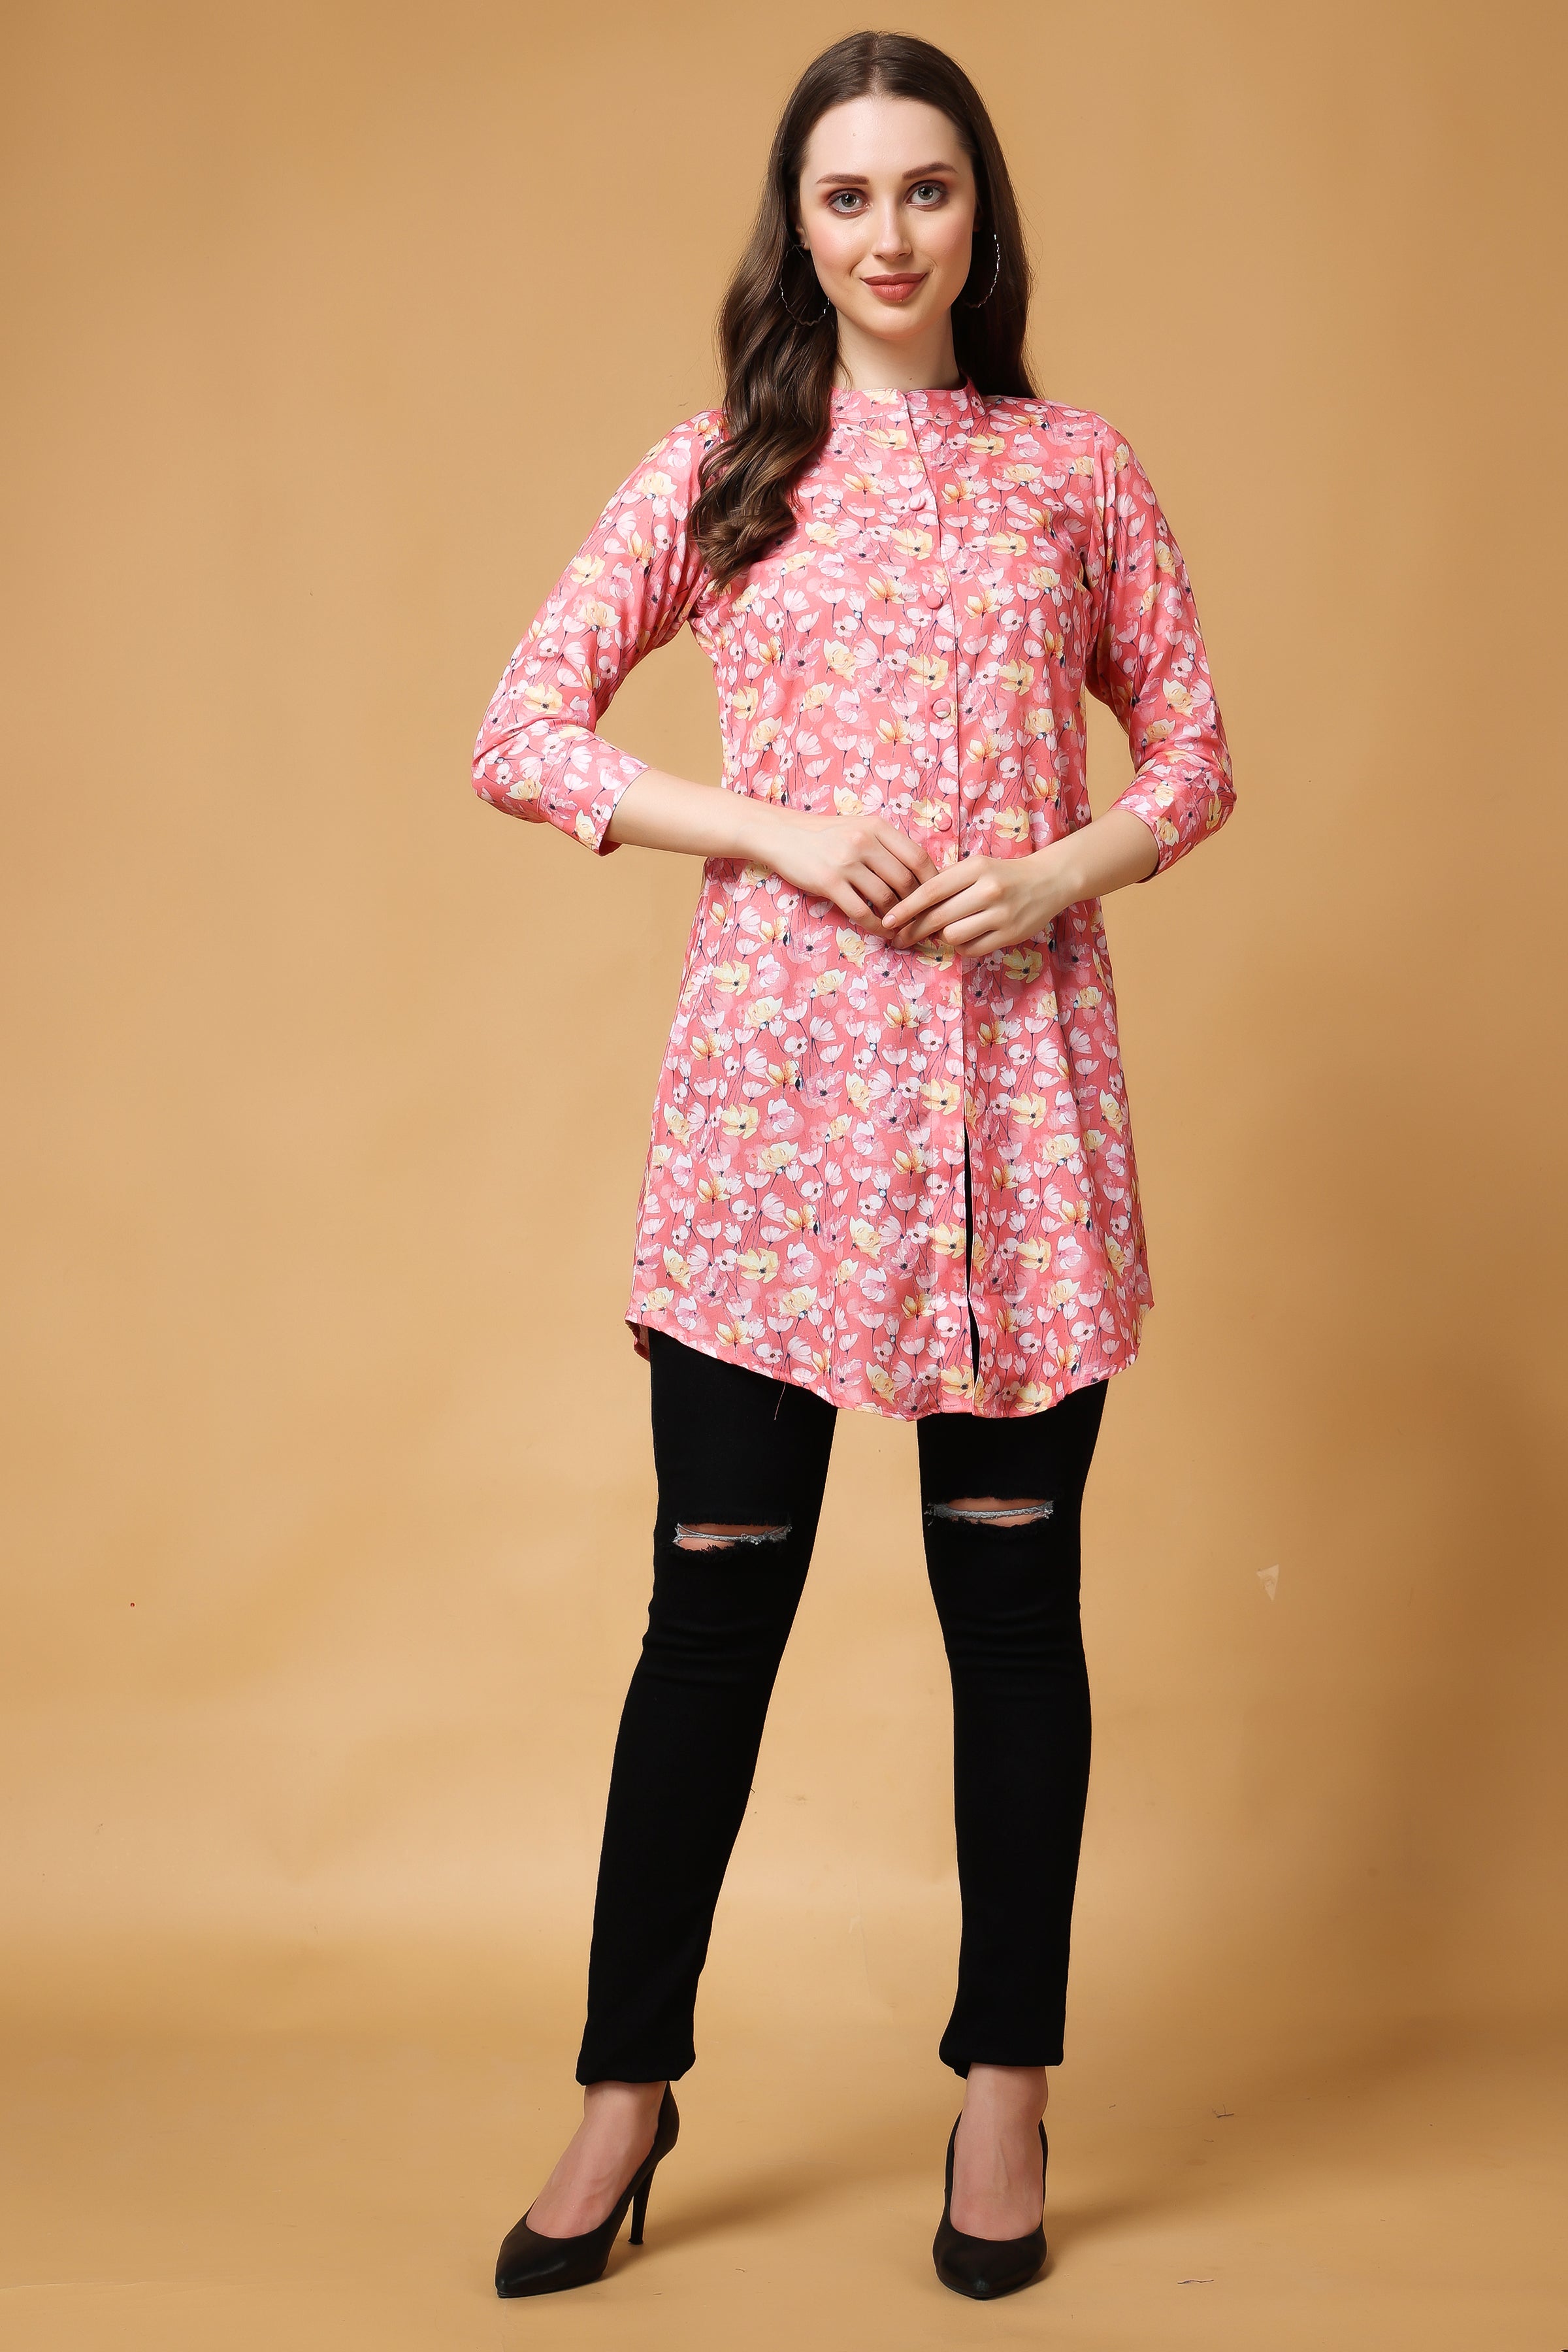 Online shopping - Delightful Cotton Kurti Fabric: Cotton Sleeves: Sleeves  Are Included Size: XS - 36 in, S - 38 in, M - 40 in, L - 42 in, XL - 44